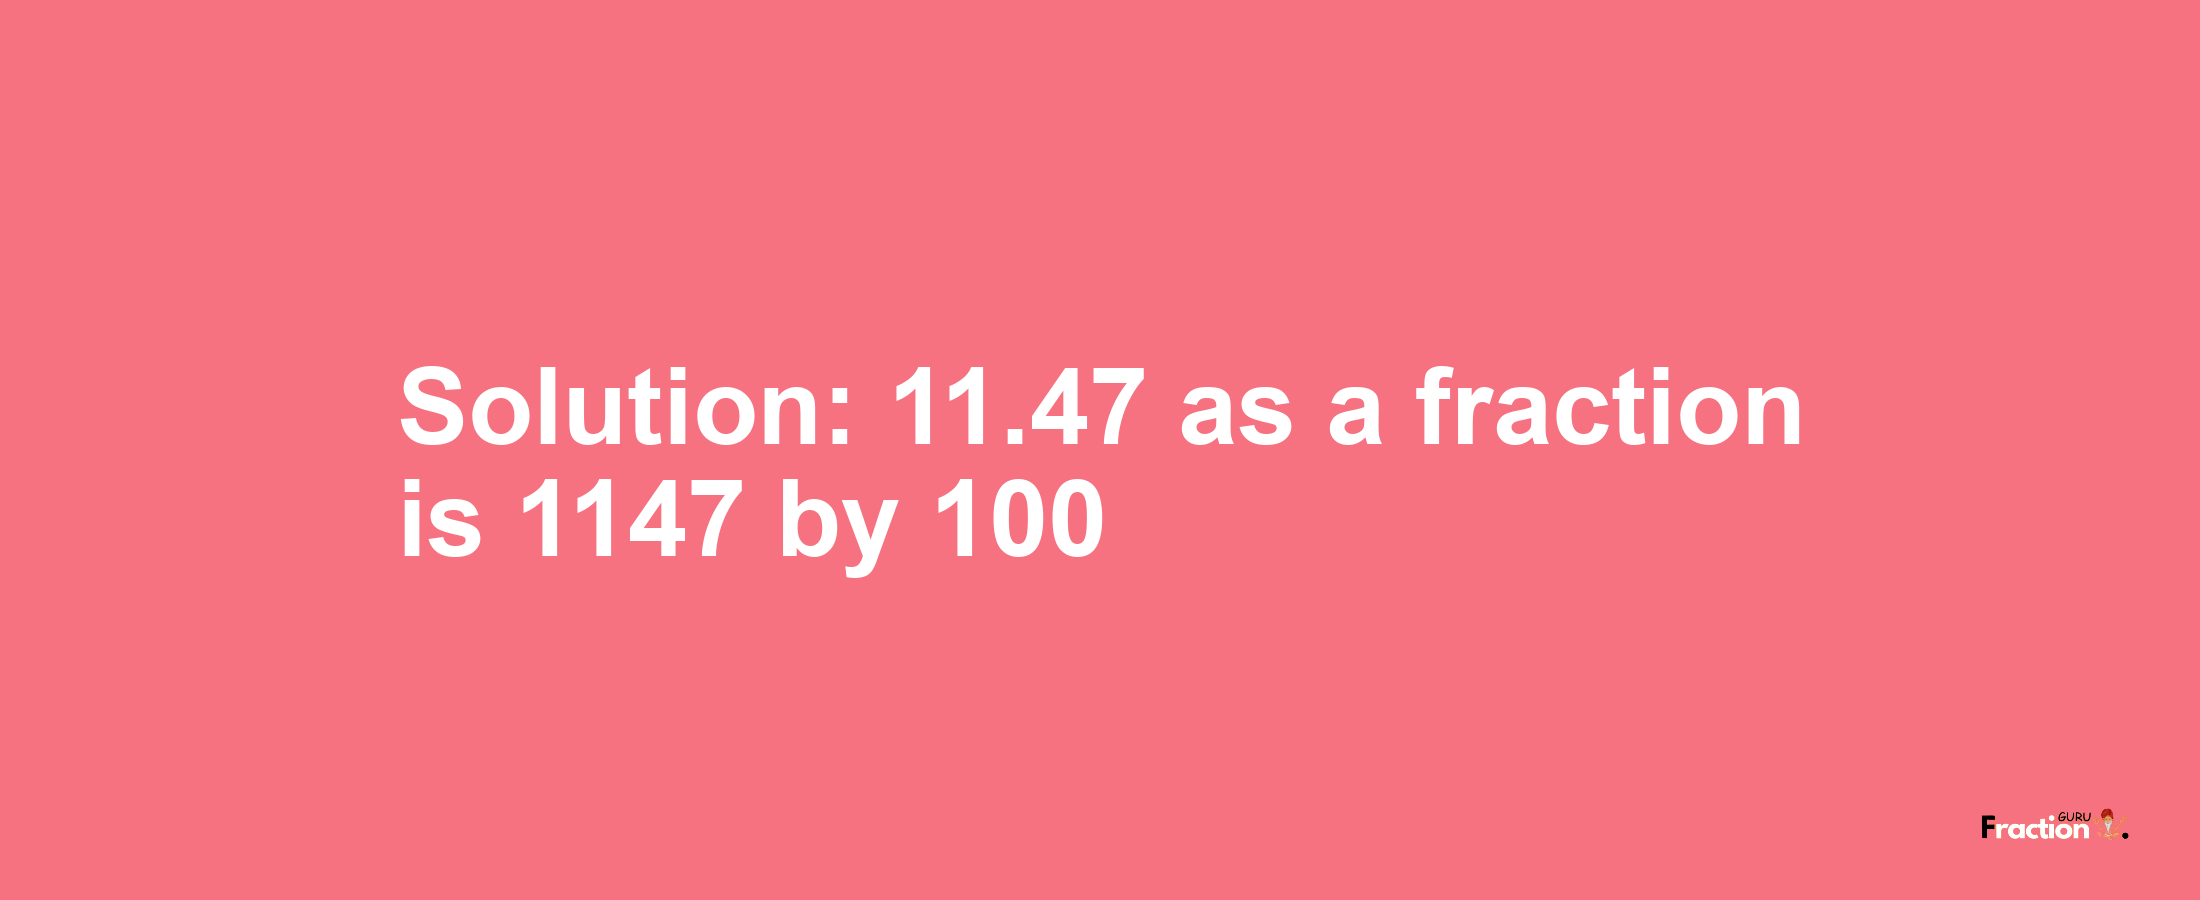 Solution:11.47 as a fraction is 1147/100